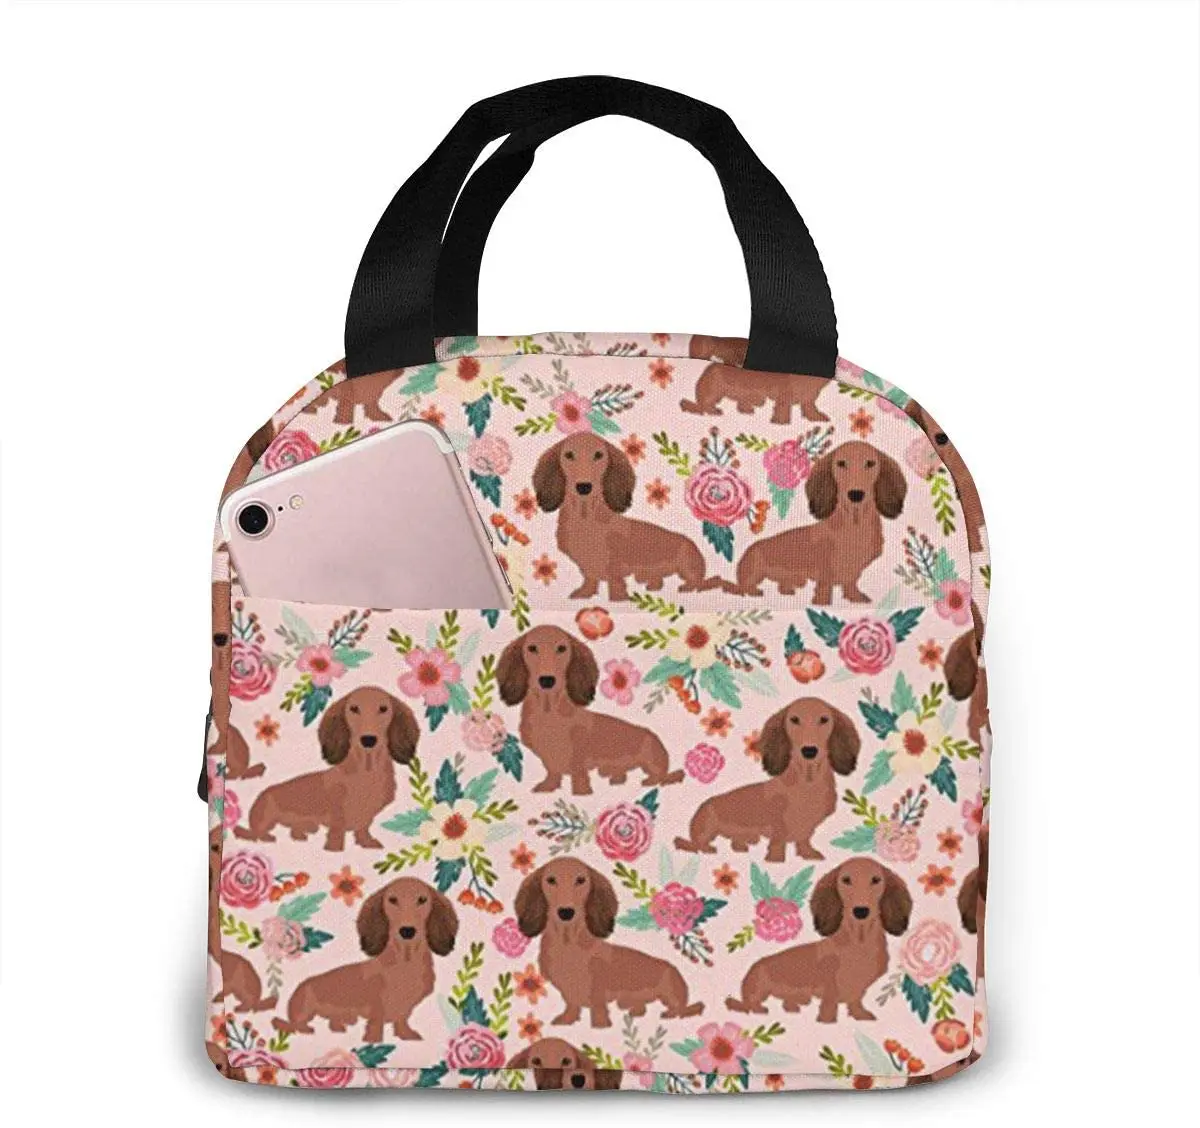 Dachshunds Floral Lunch Bag for Women Insulated Picnic Pouch Thermal Cooler Tote Bento Meal Prep Cute Bag for Lunch Box Camping